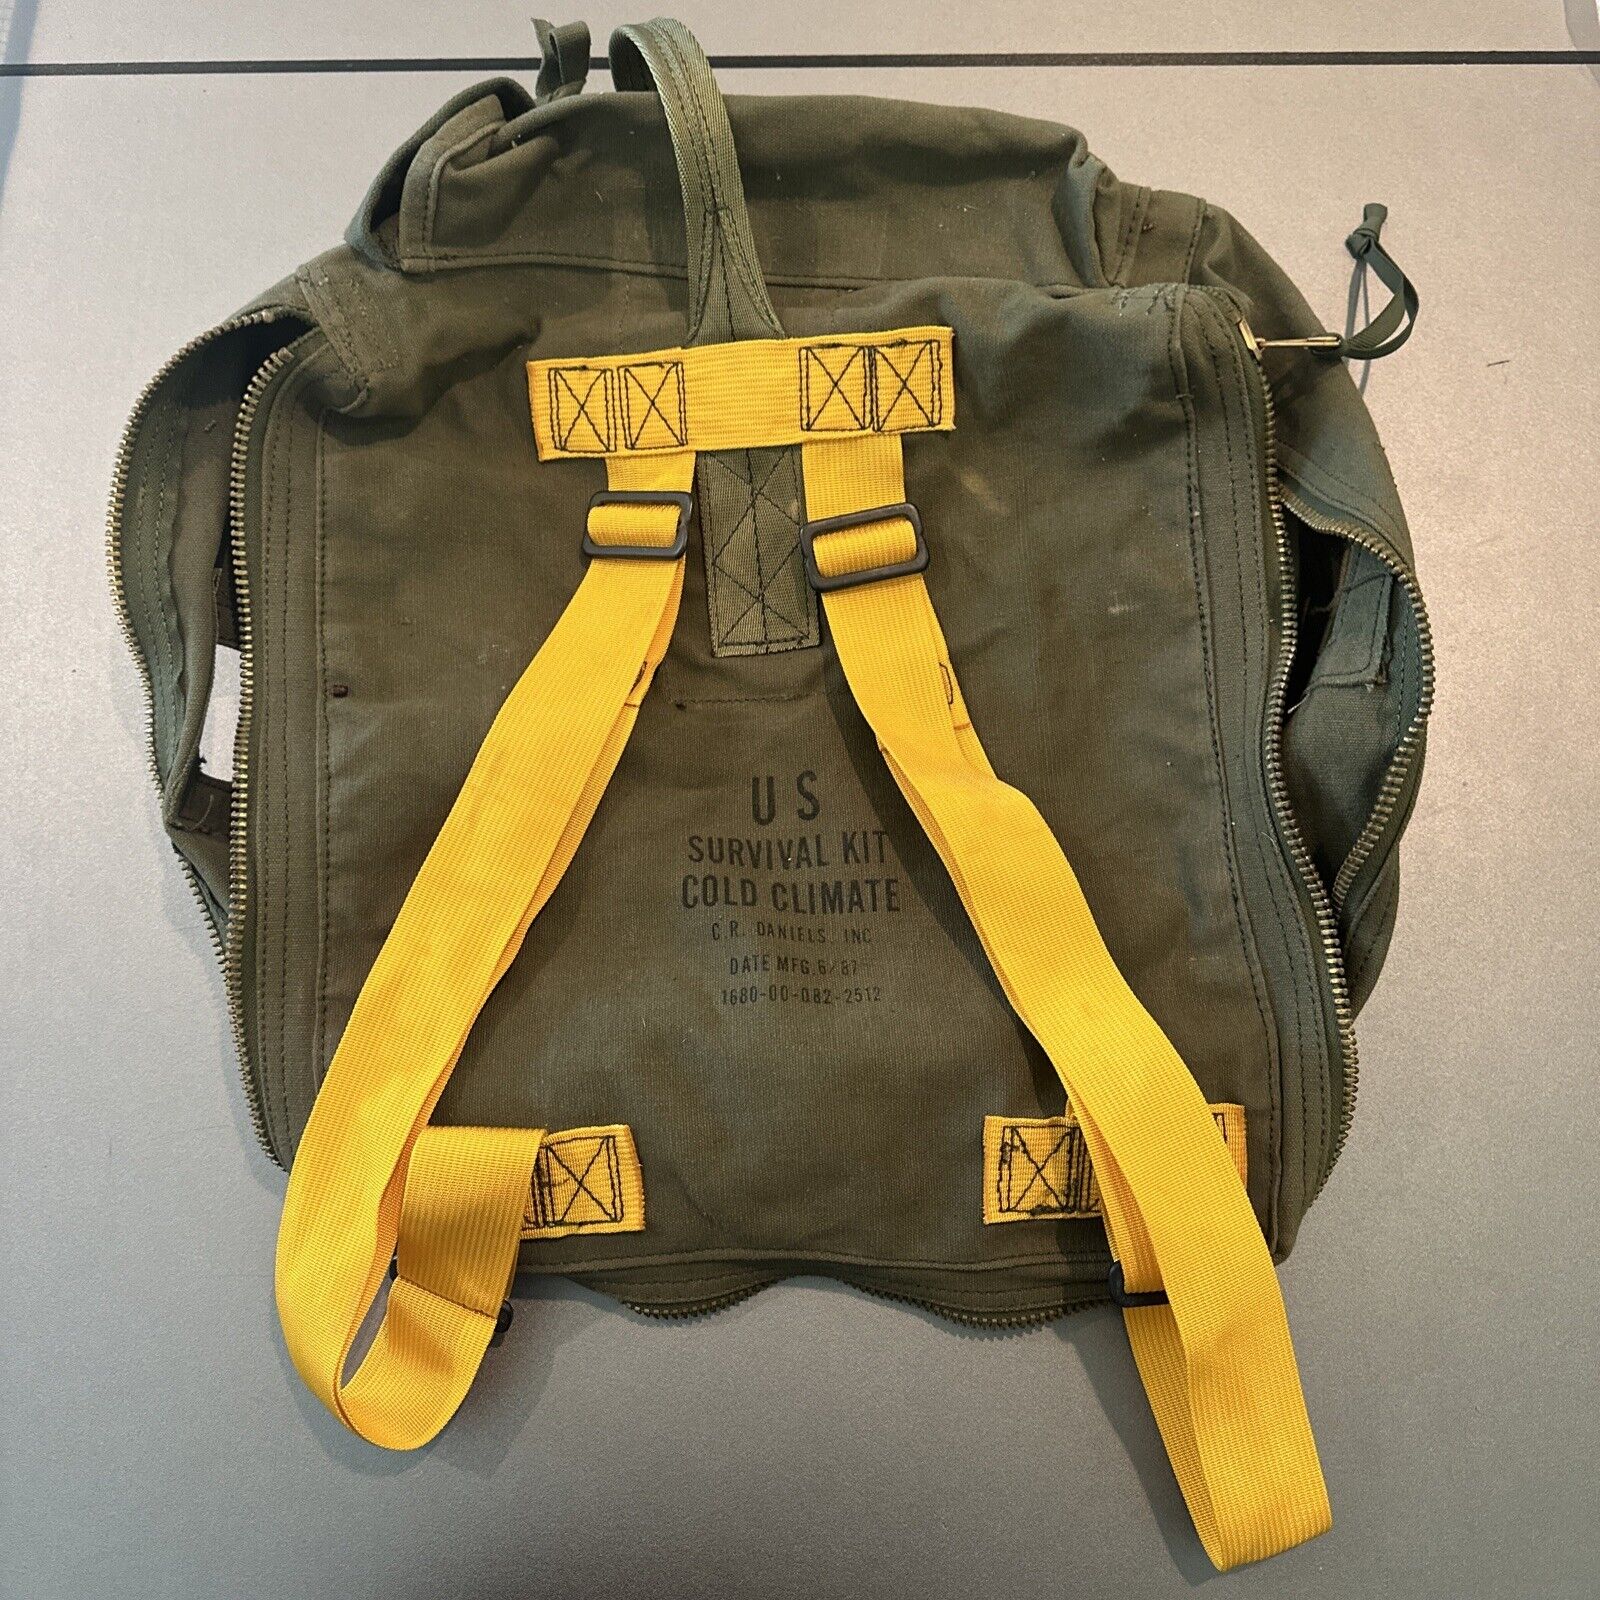 US Military Survival Kit Cold Climate Carrying Bag With Pan